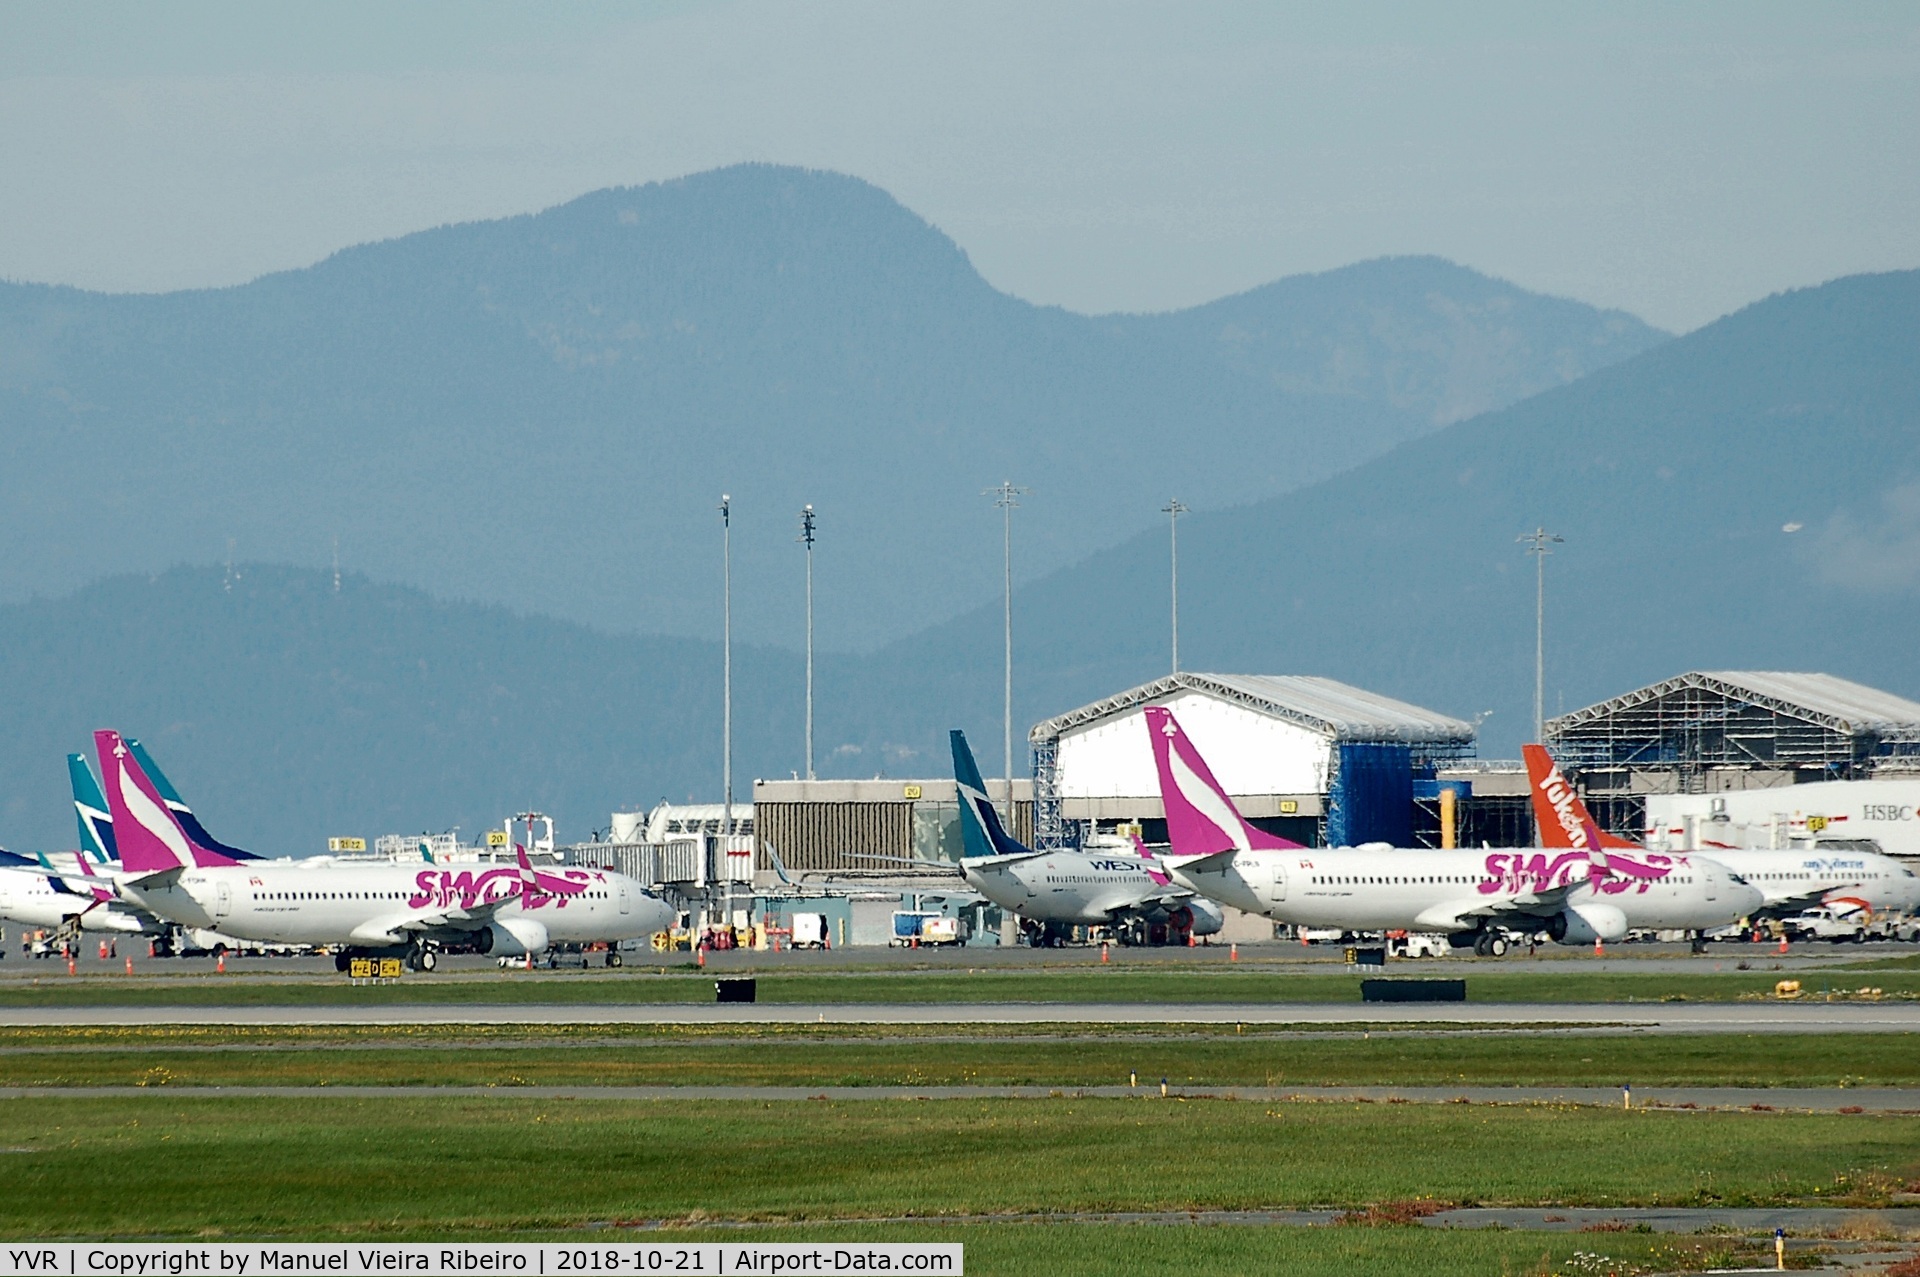 Vancouver International Airport, Vancouver, British Columbia Canada (YVR) - Sunday activity at YVR